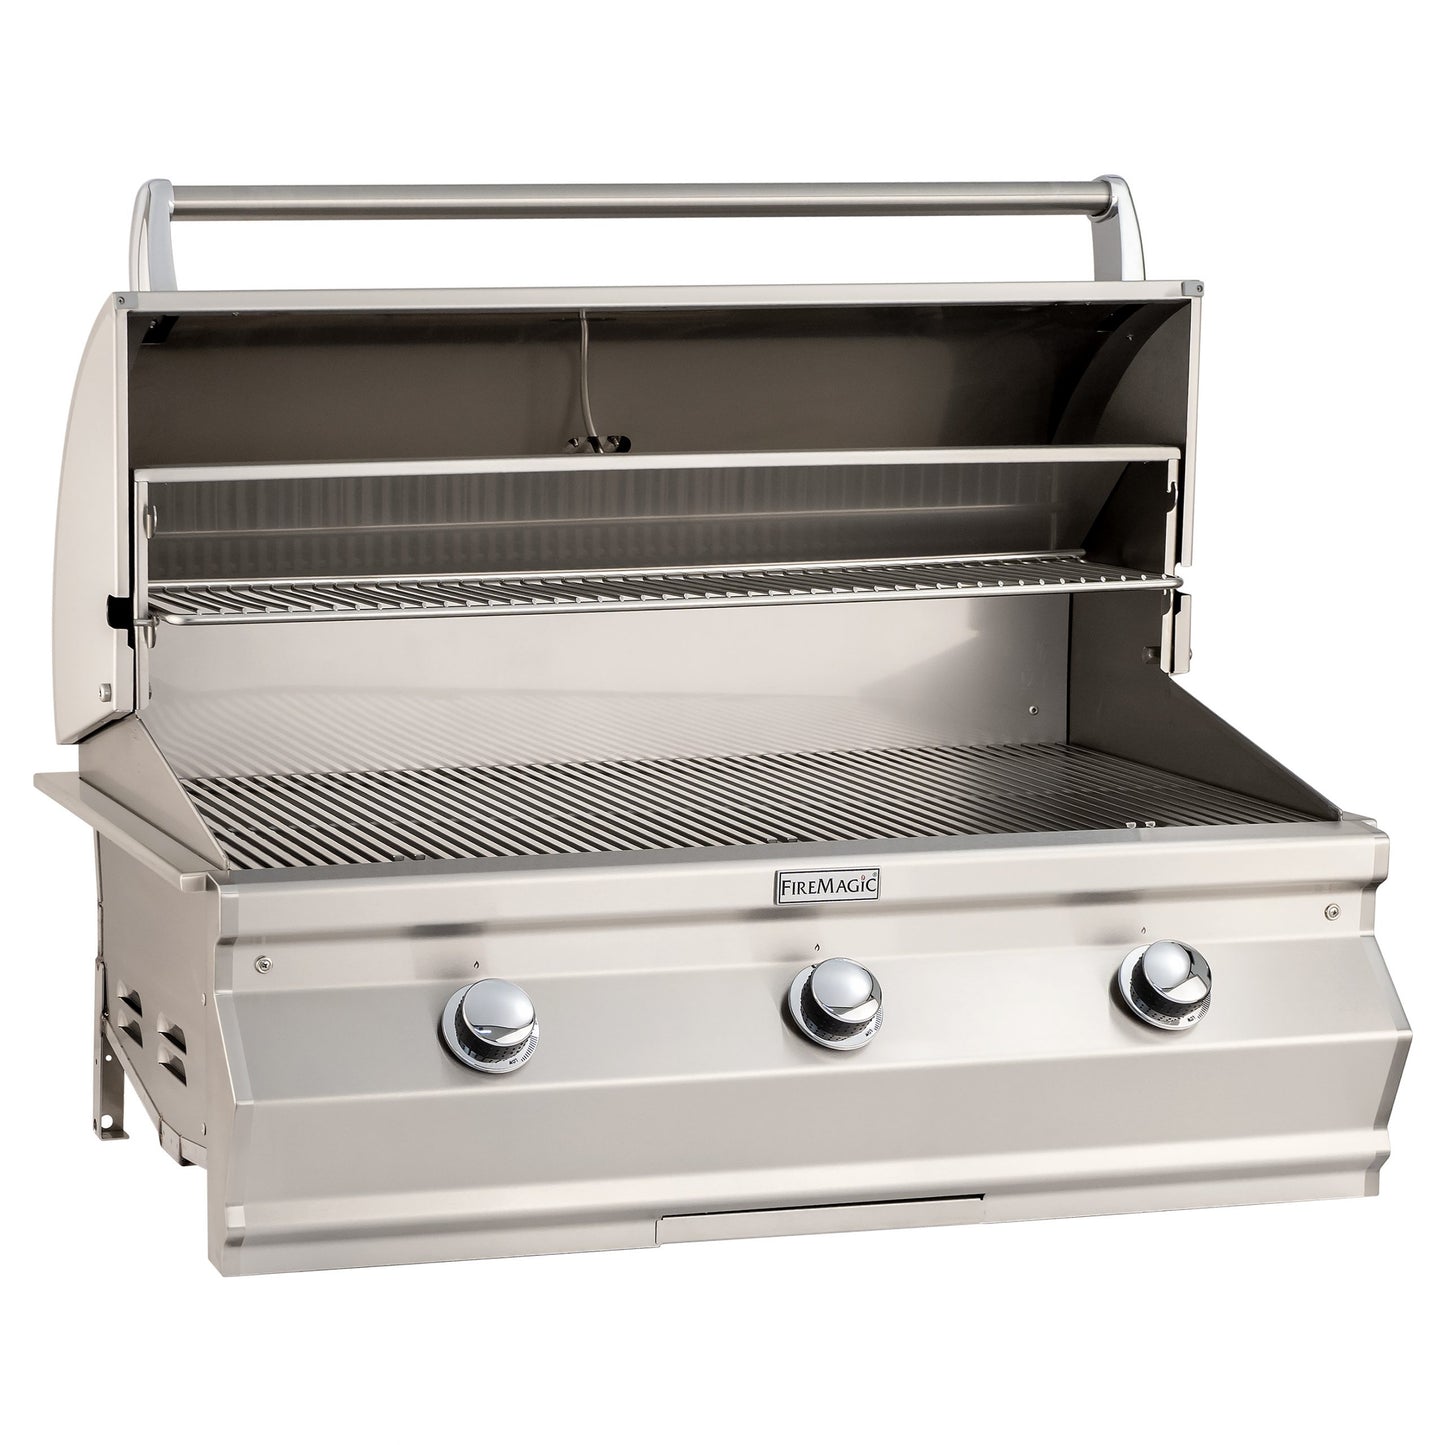 Fire Magic Choice C650i Built-in 36 in. Grill